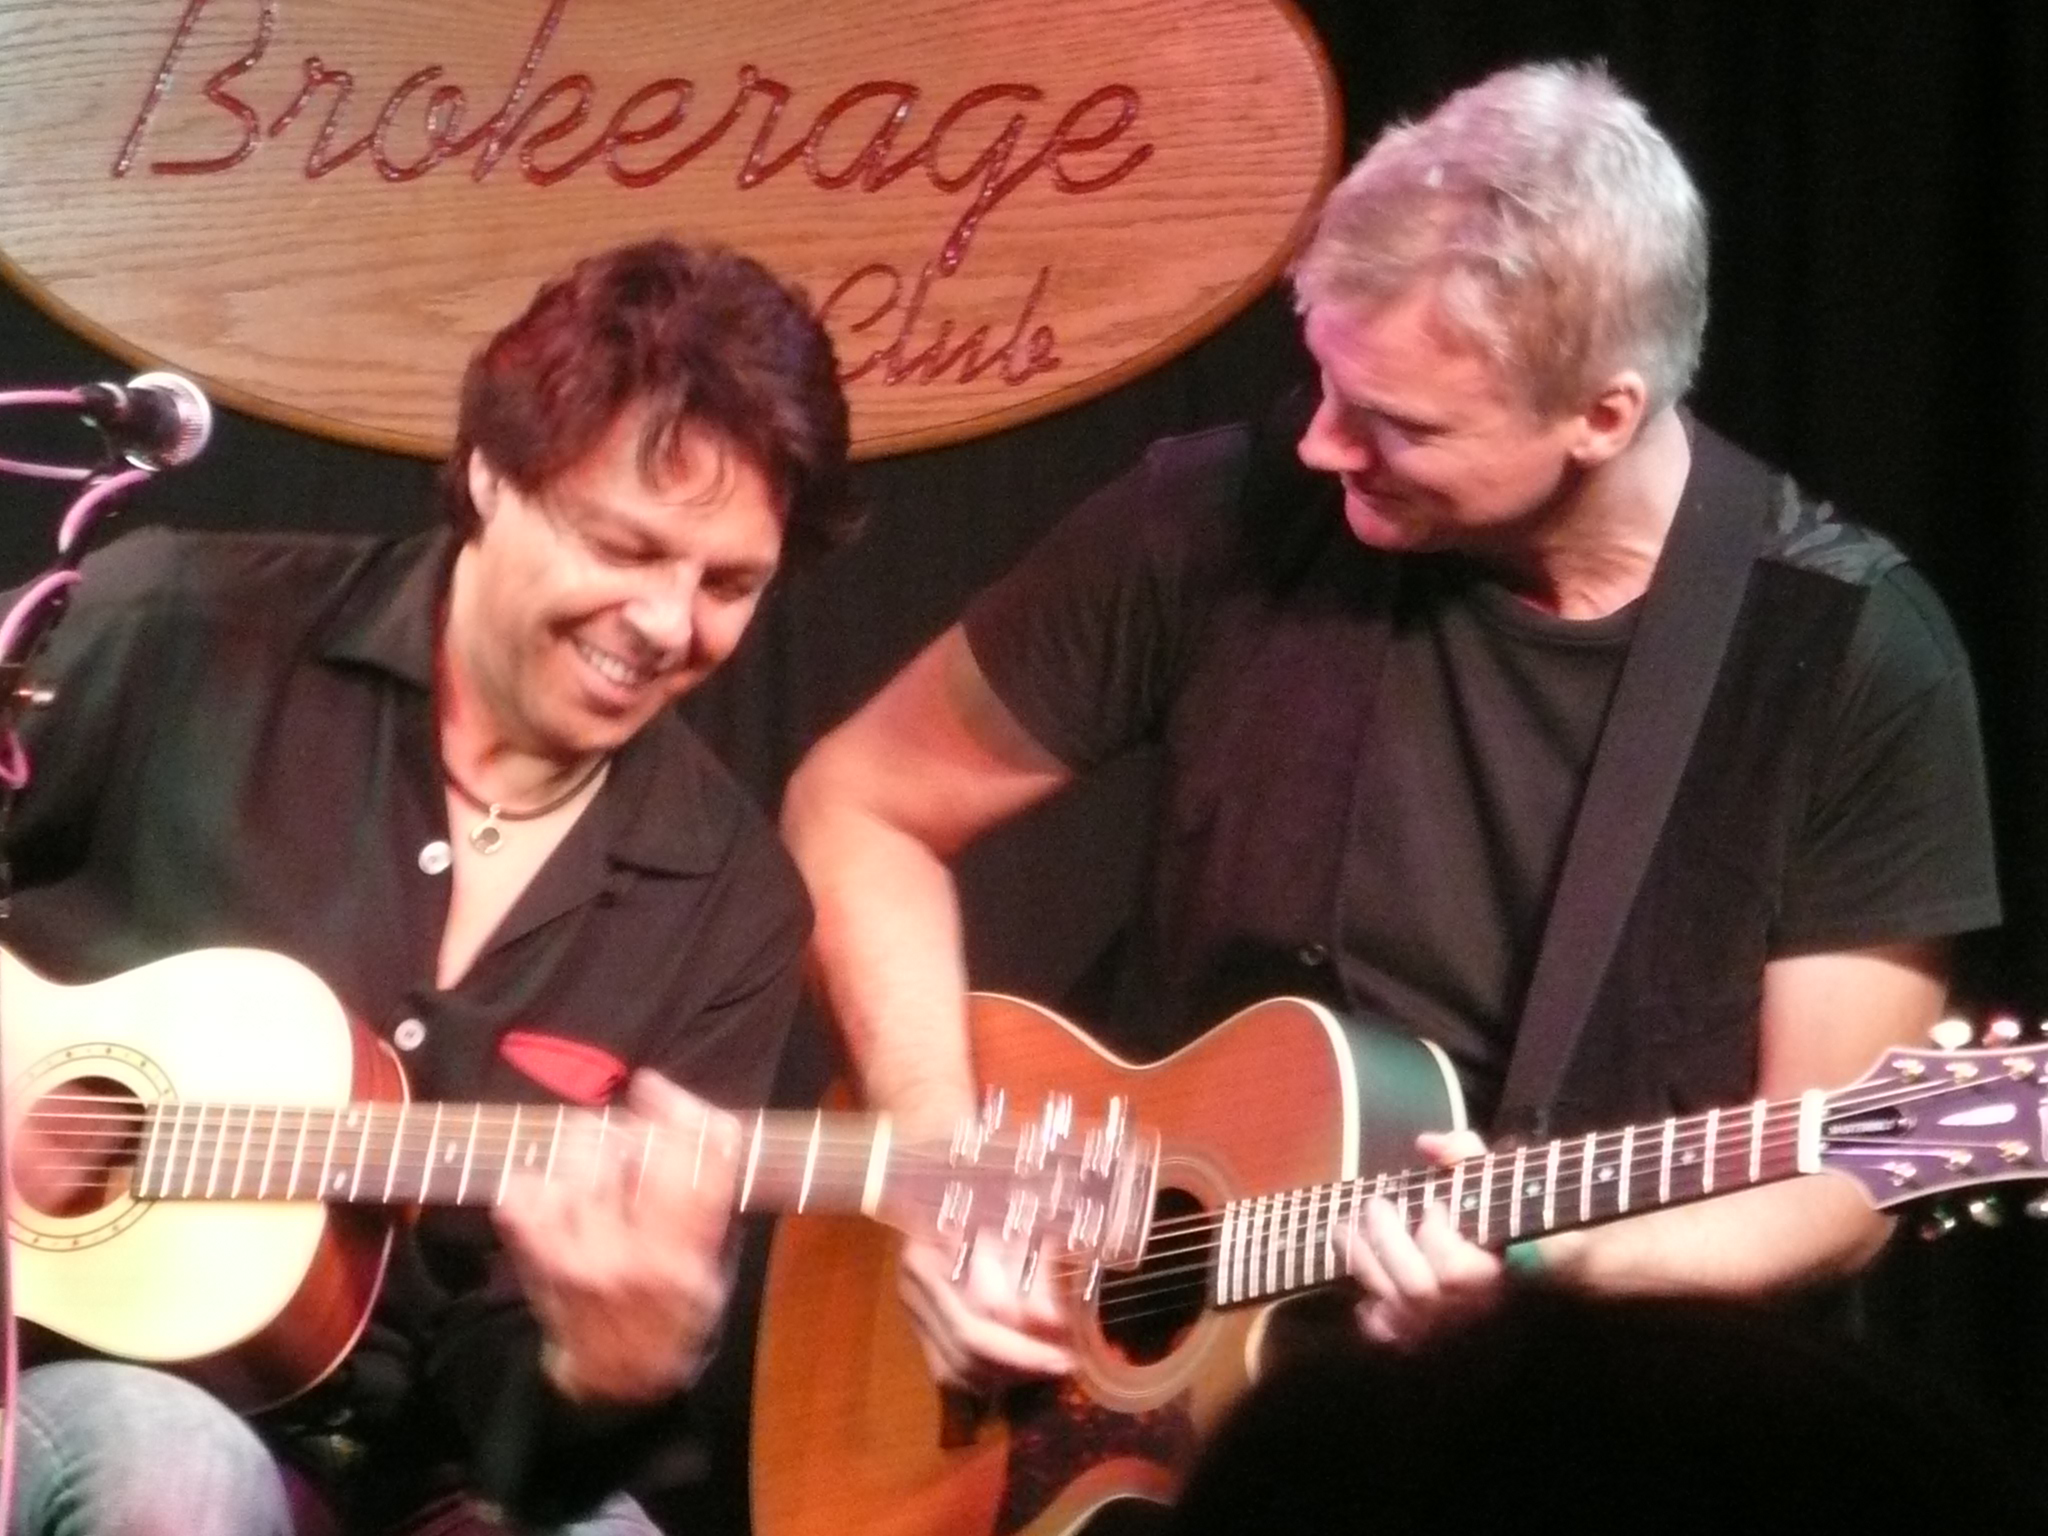 Kasim Sulton and Eilot Lewis at The Brokerage Comedy Club, Bellmore, NY - 10/16/11